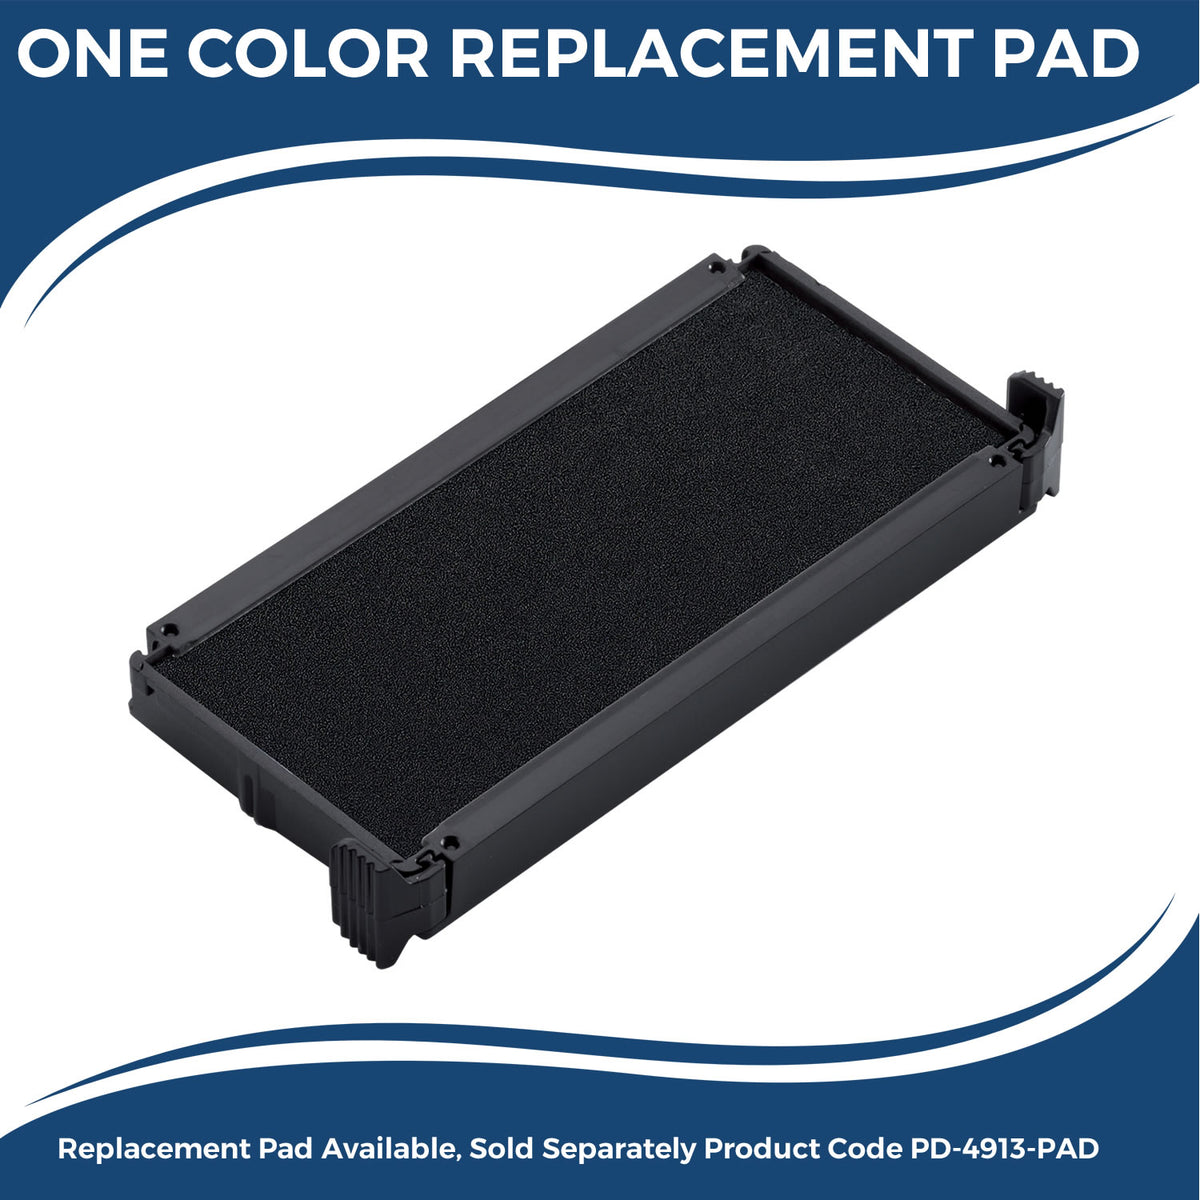 Large Self-Inking OCR Stamp 4905S Large Replacment Pad